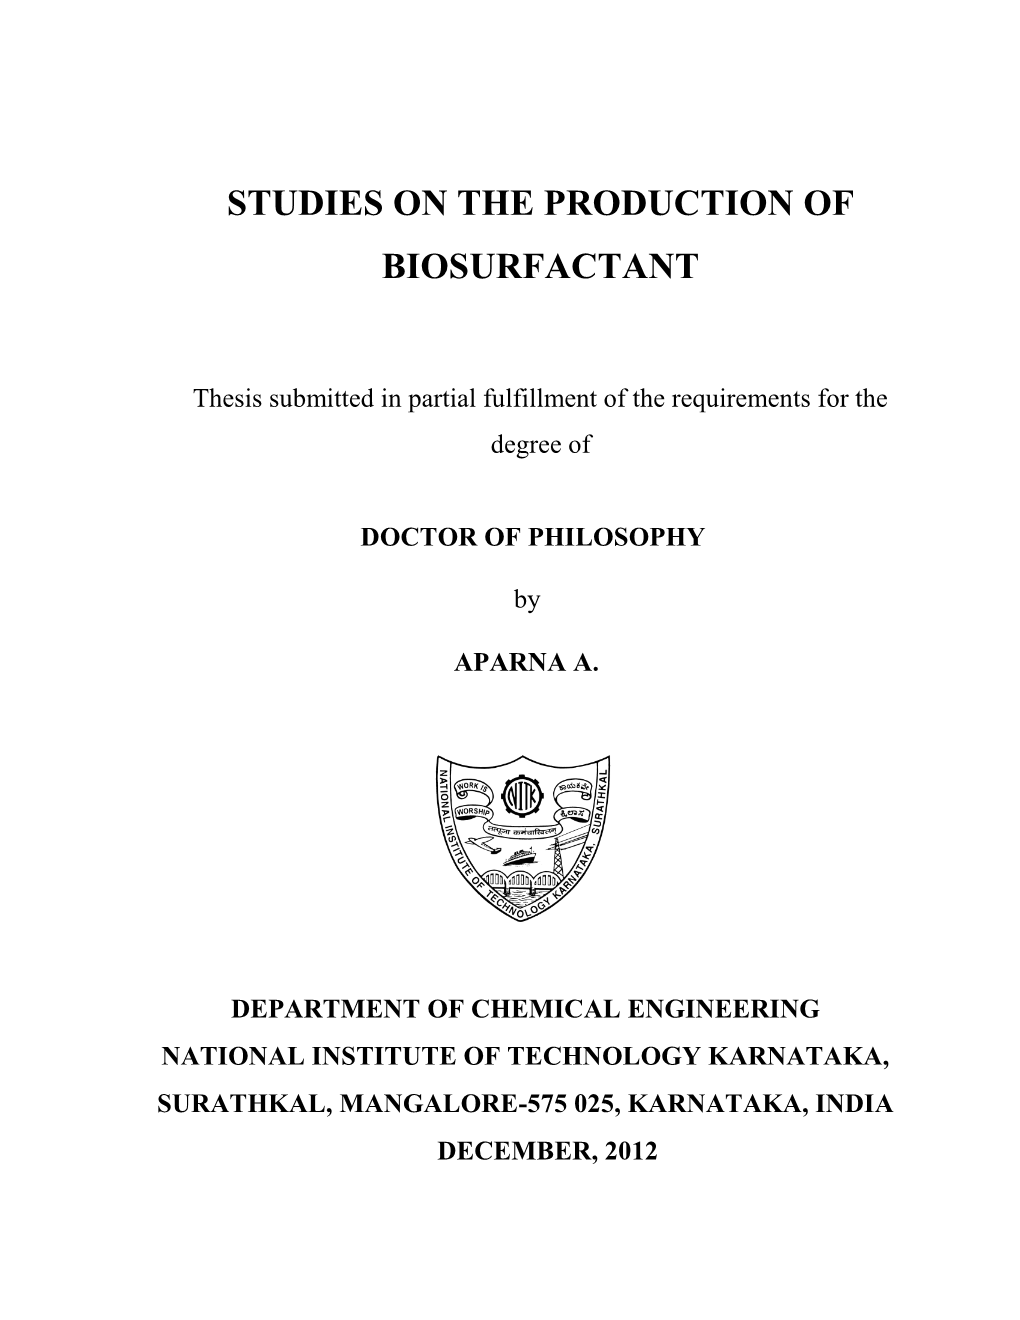 Studies on the Production of Biosurfactant